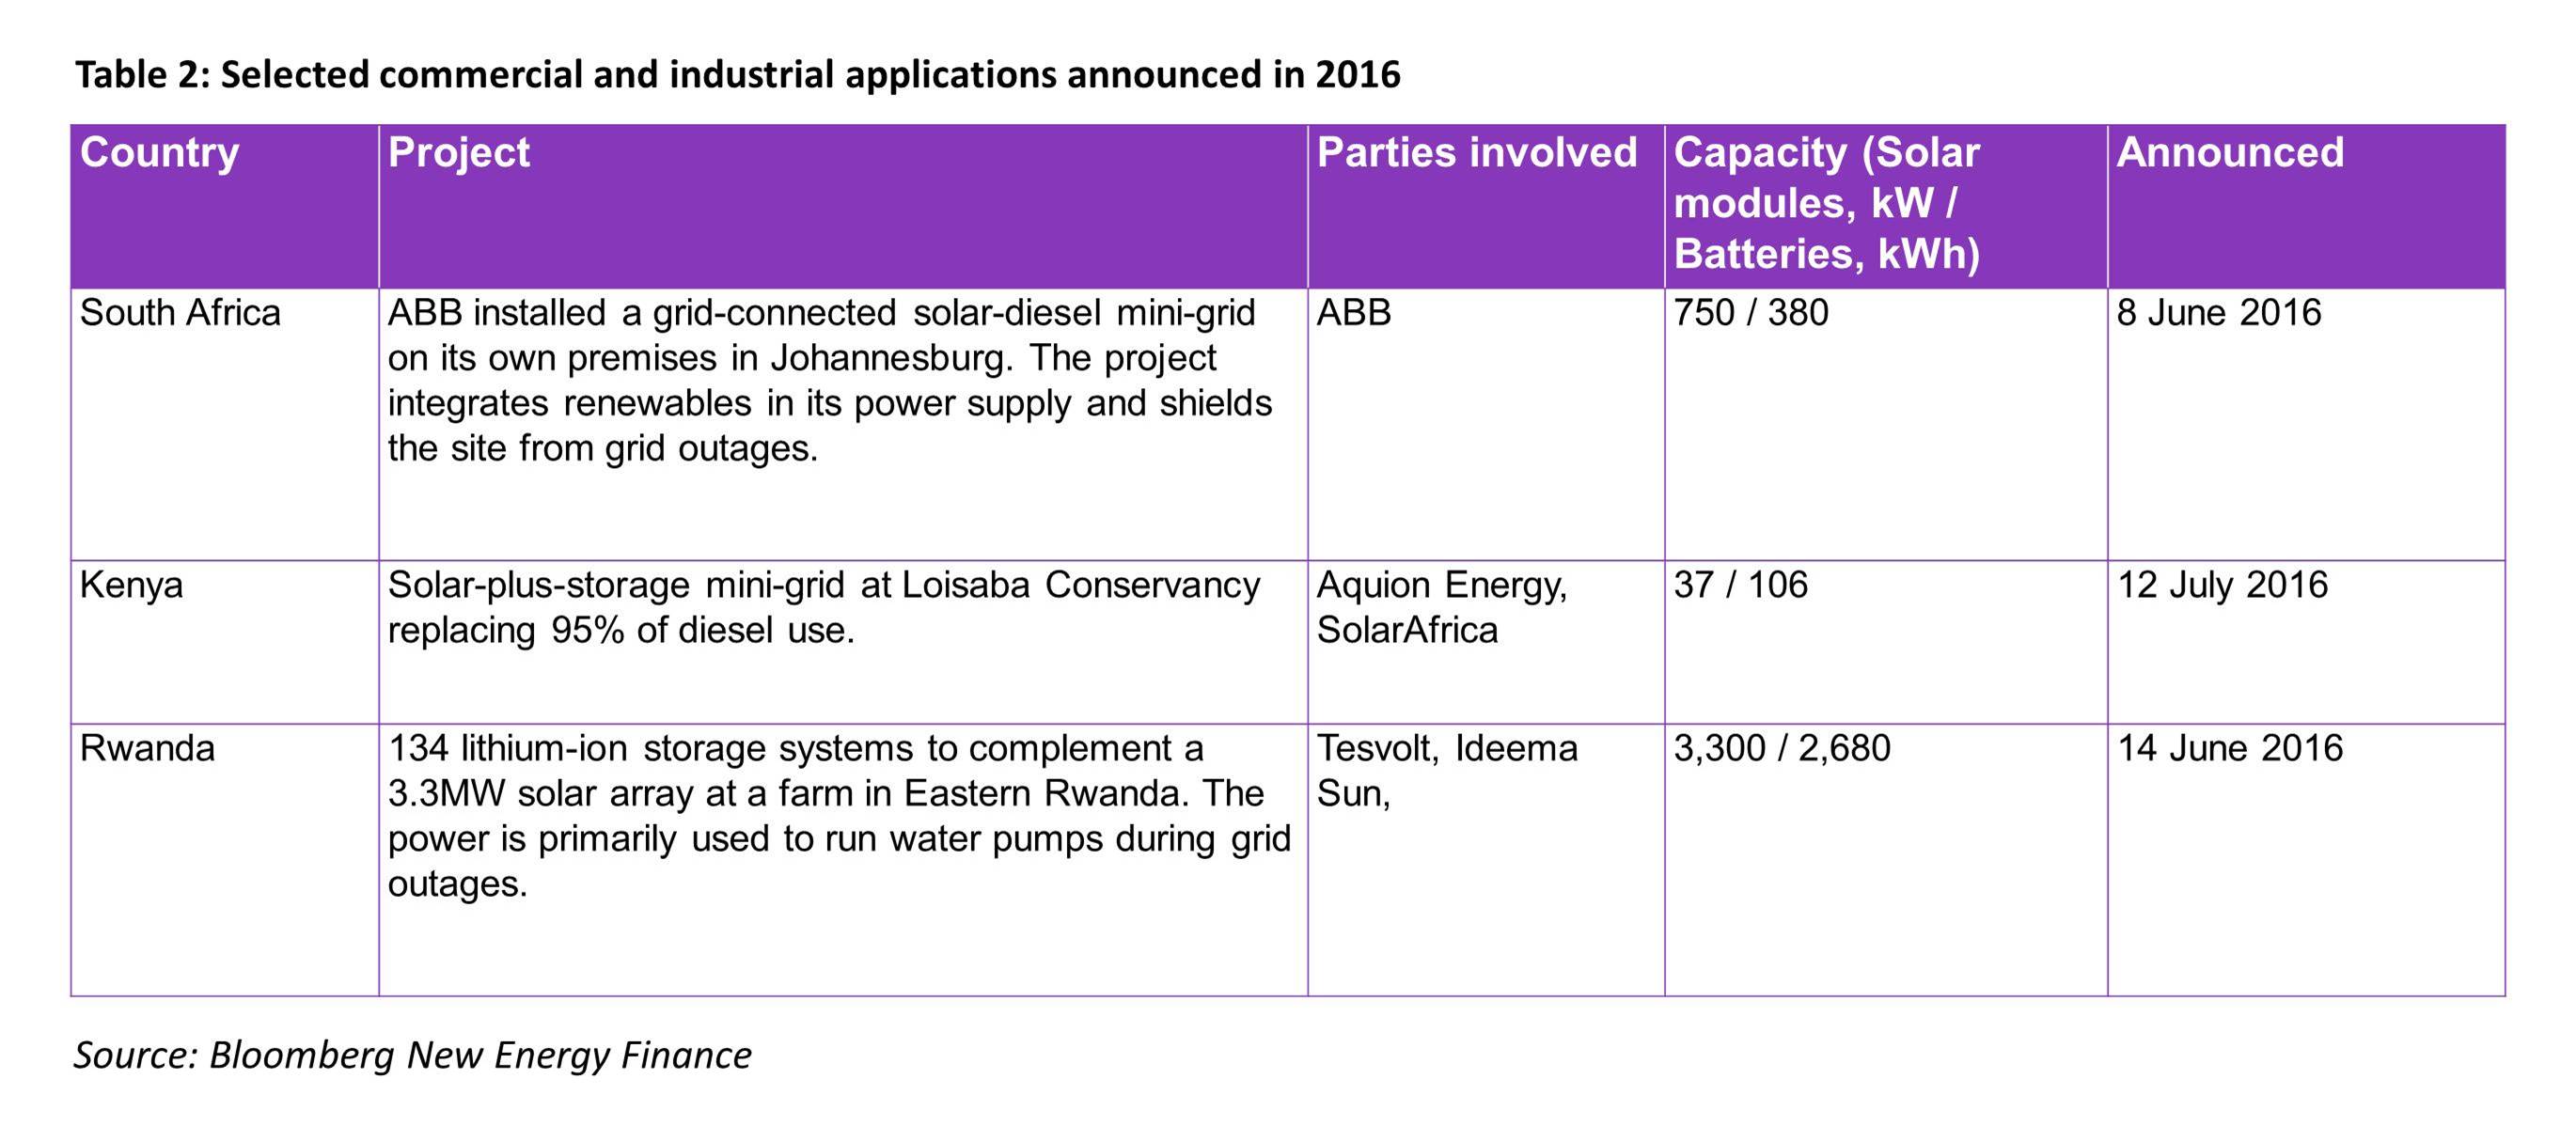 OG - Table2 - Selected commercial and industrial applications announced in 2016